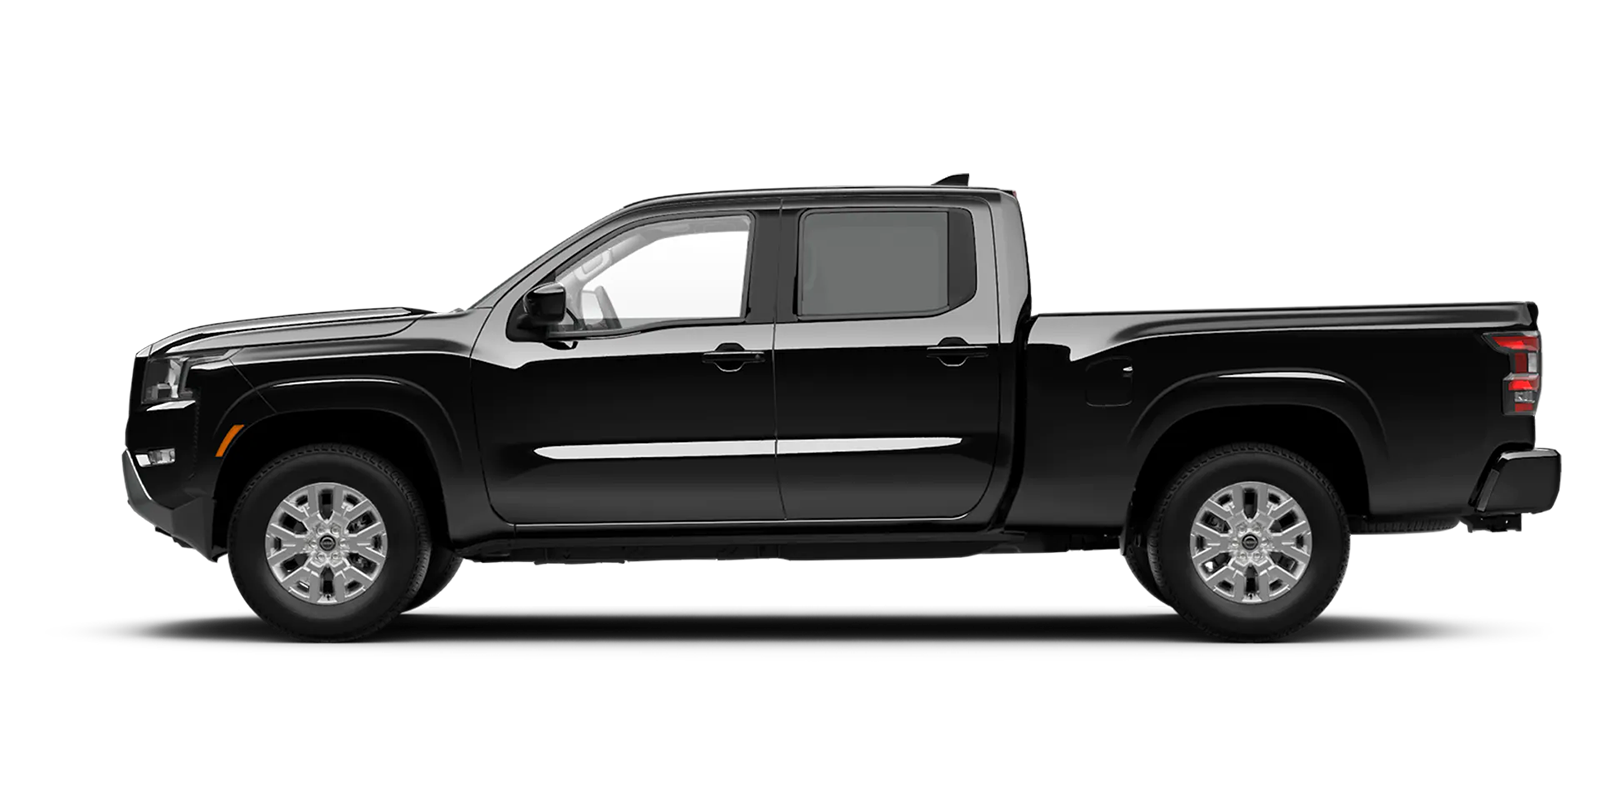 2022 Frontier Crew Cab Long Bed SV 4x4 in Super Black | Performance Nissan of Pompano in Pompano Beach FL